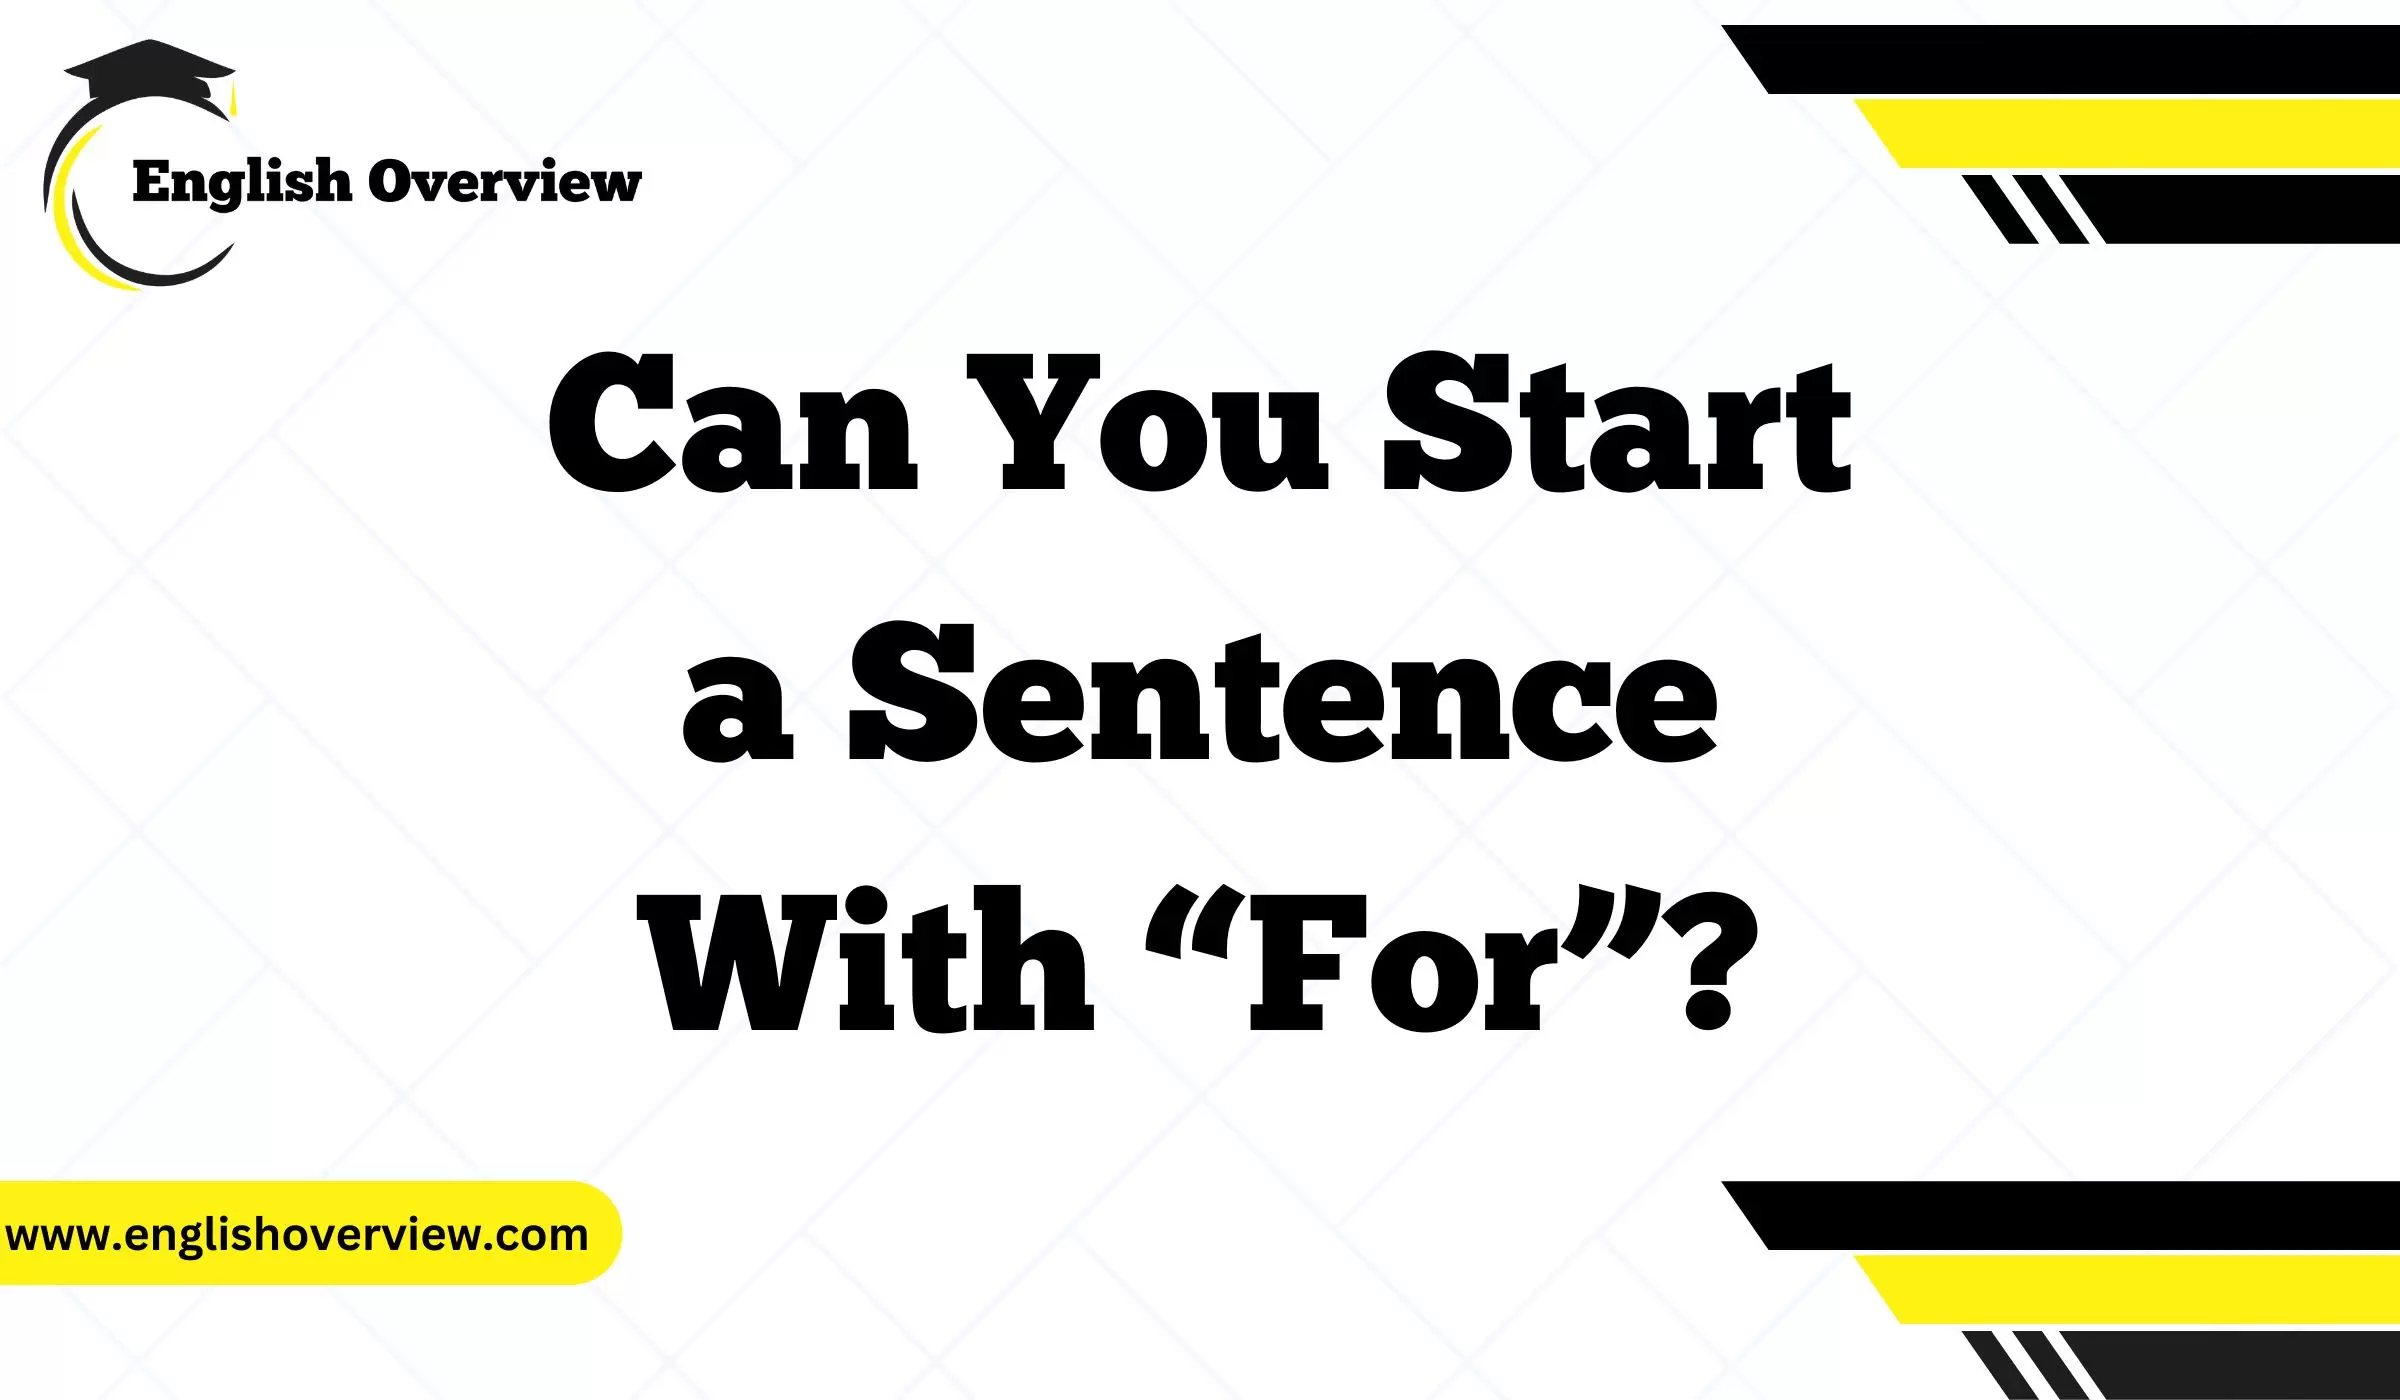 Can You Start a Sentence With “For”